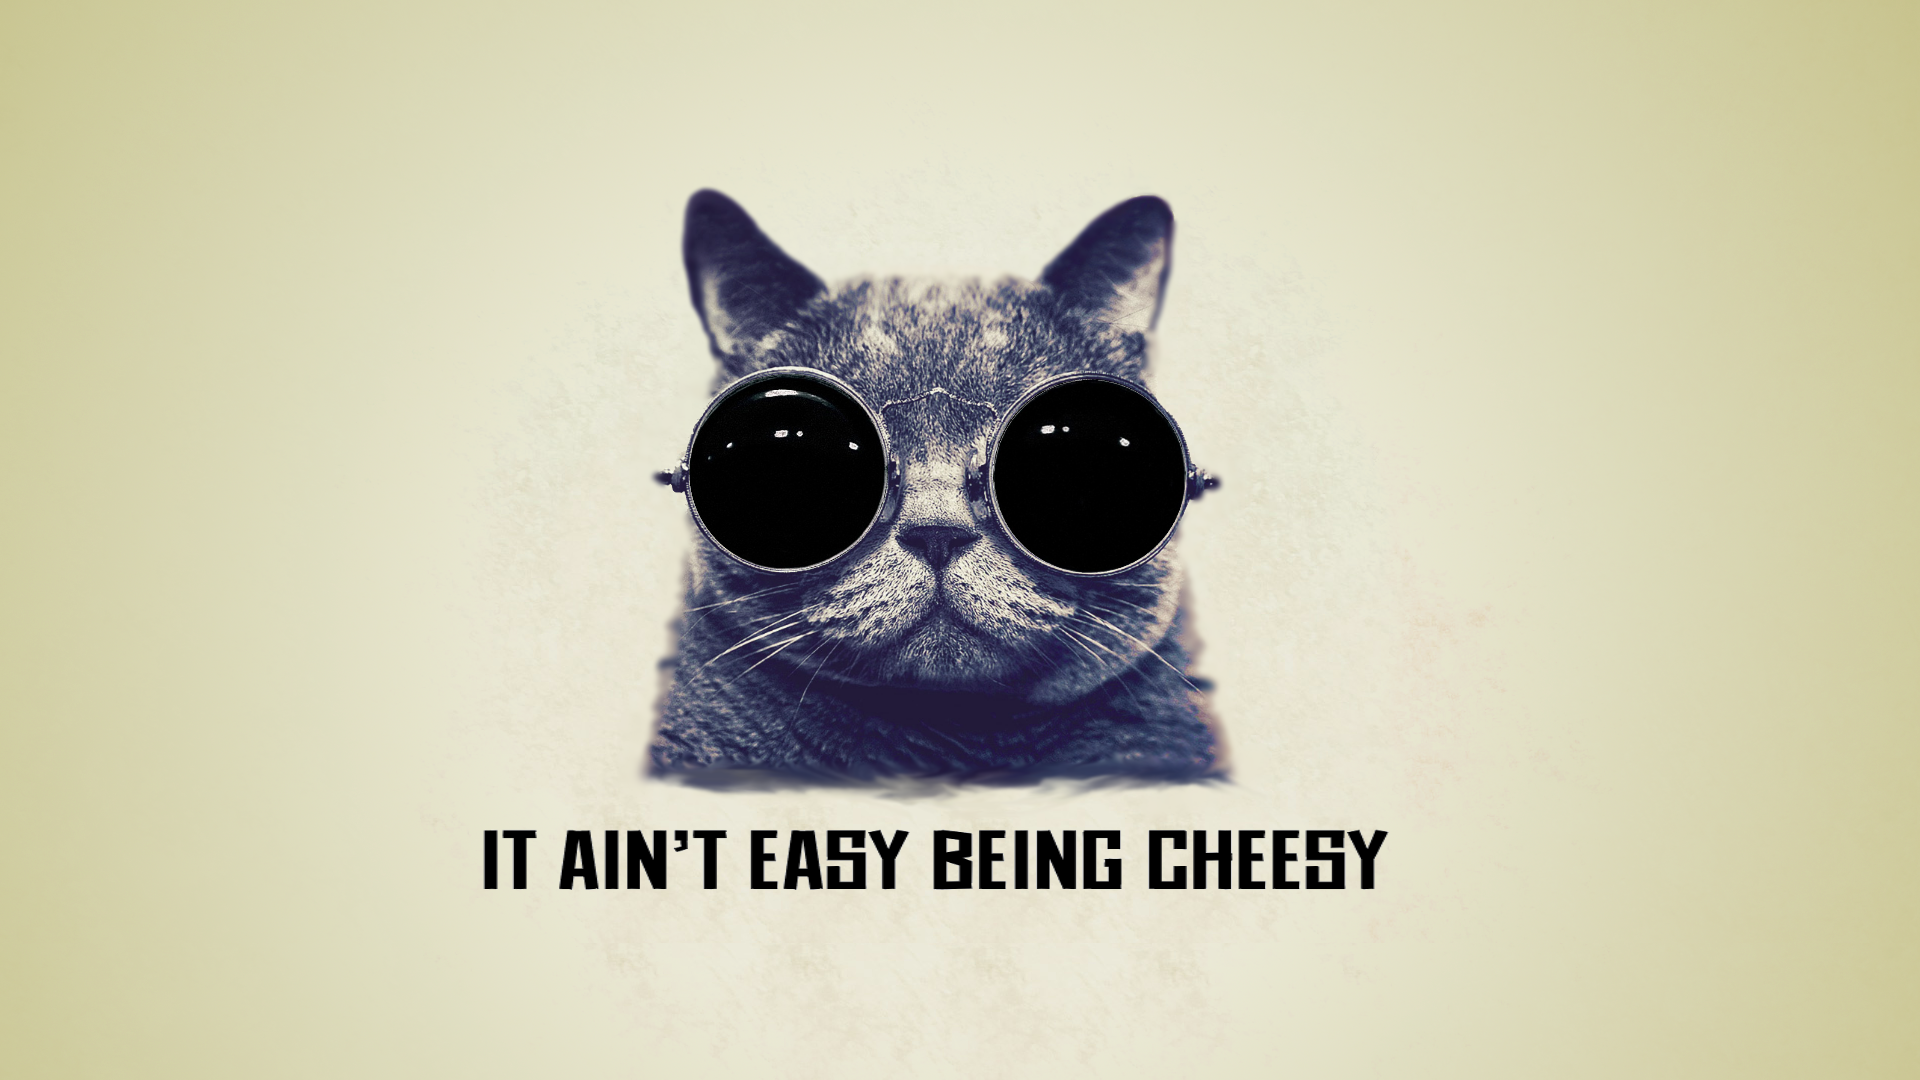 It aint easy being cheesy cool cat wallpaper by